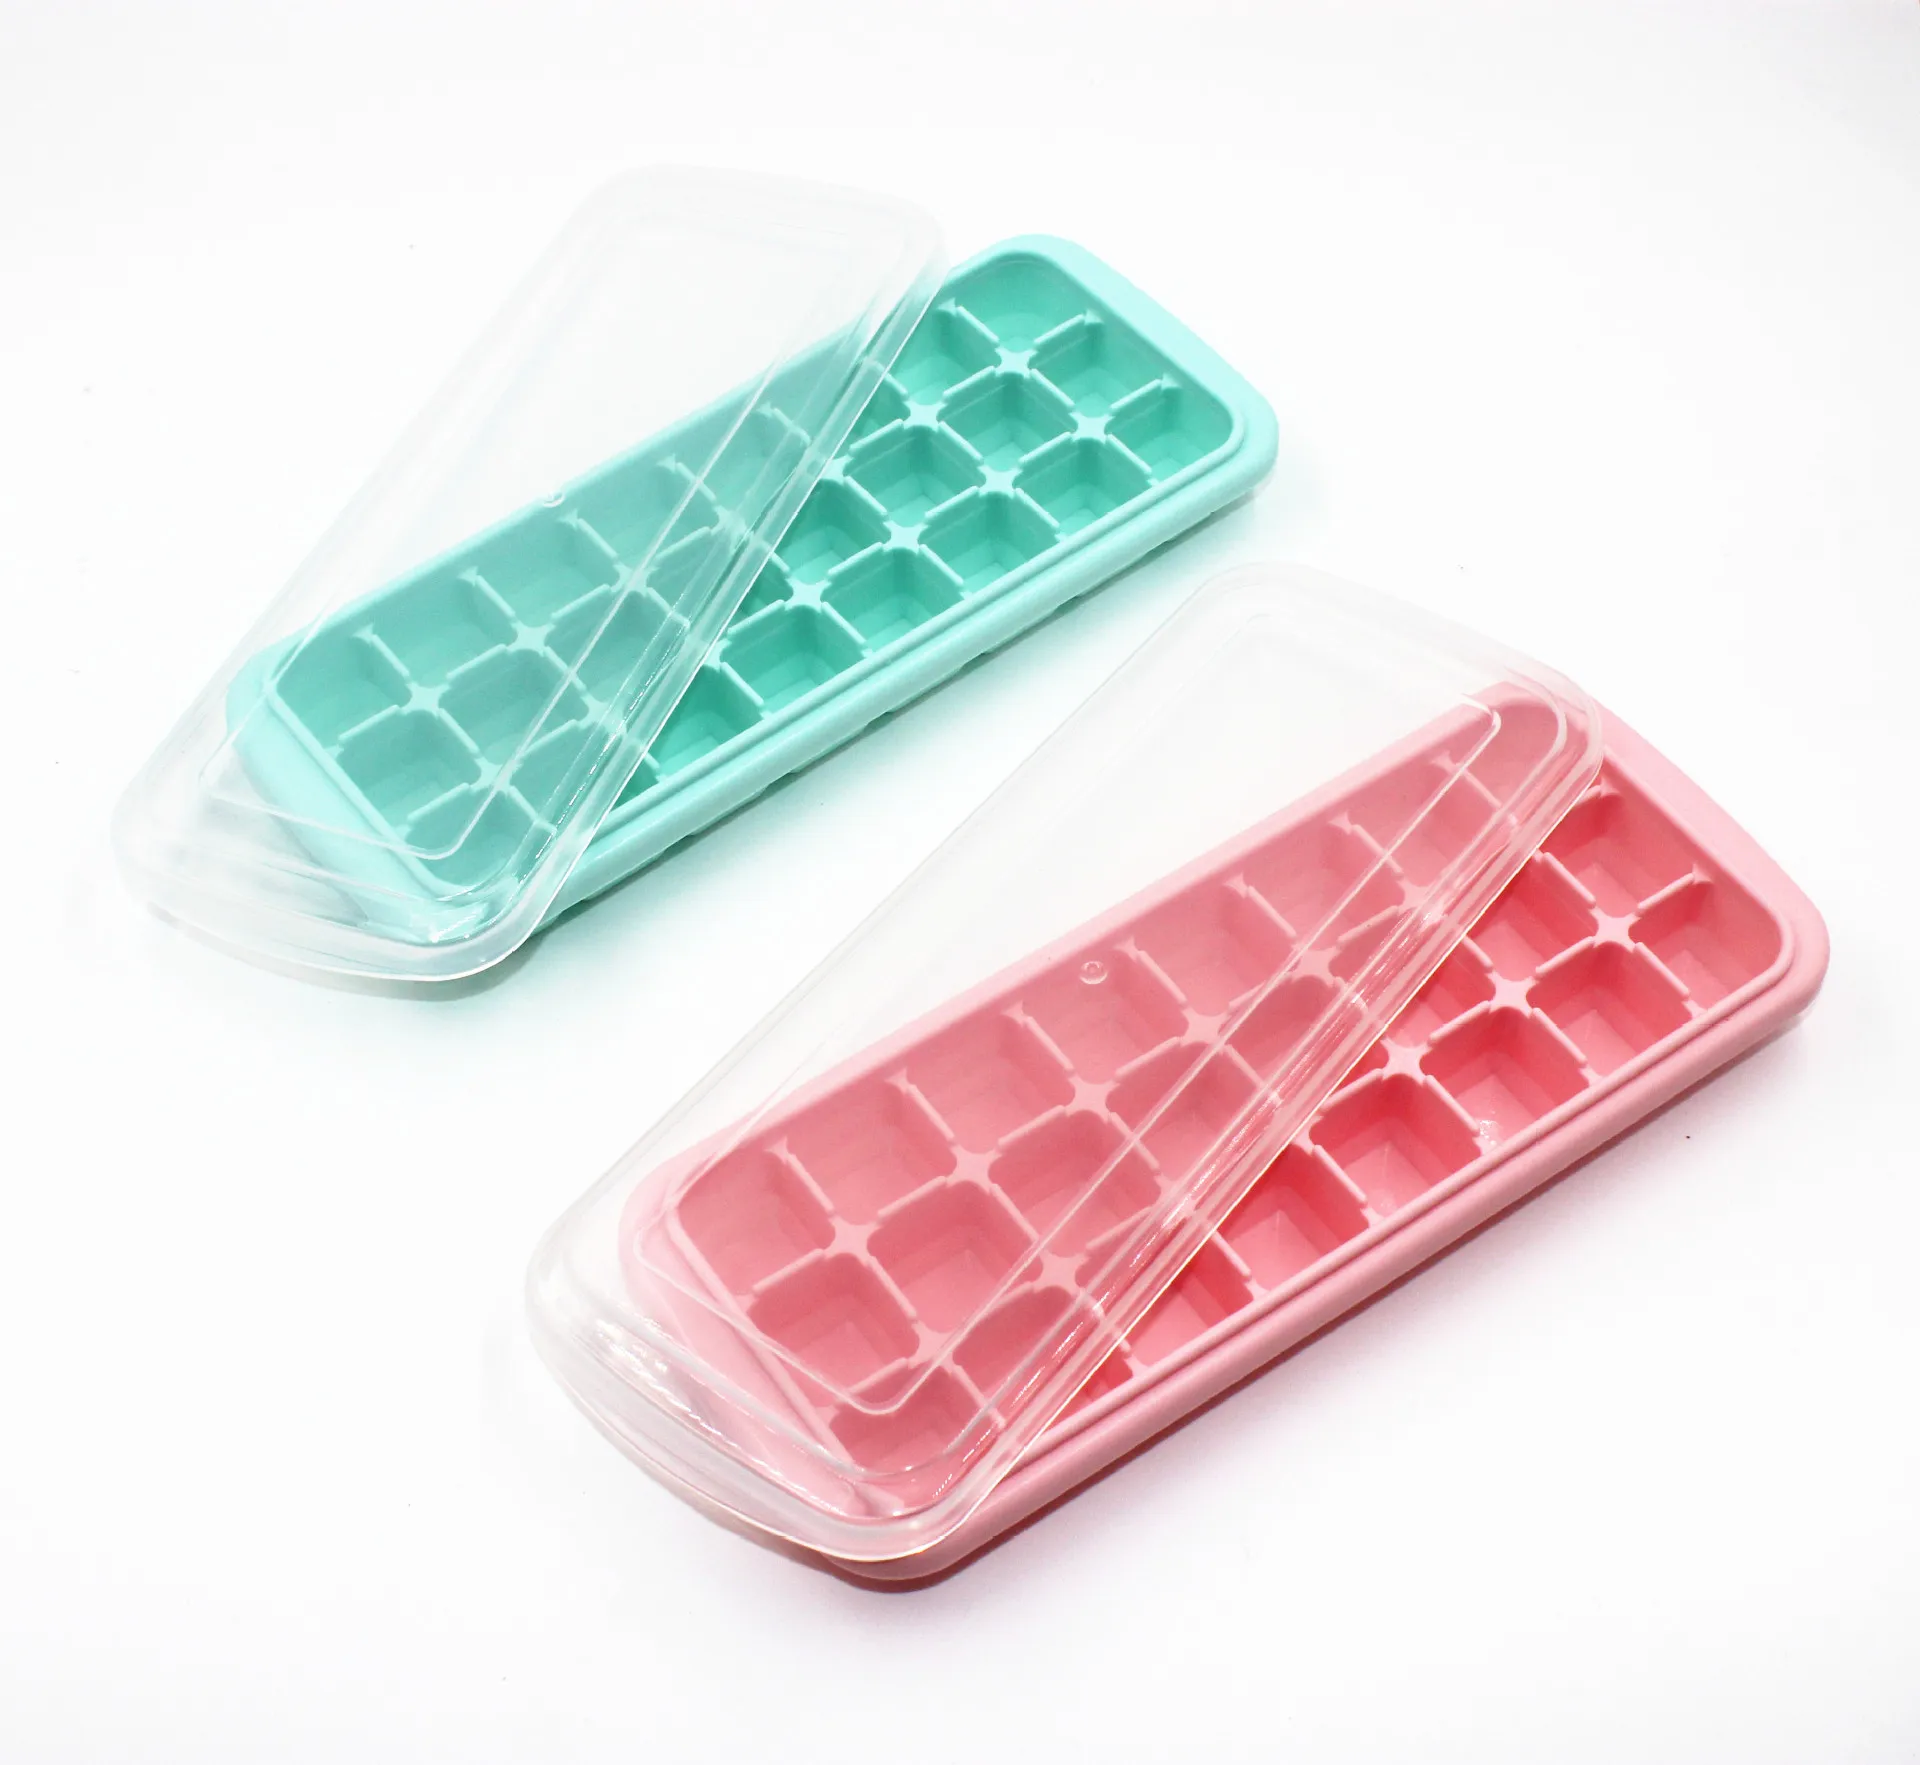 Easy Release Ice Cube Mold Containers Silicone Ice Cube Maker for Cocktail Whiskey 21 Shaped Cubes Each with Cover Korlon 3 Pack Silicone Ice Cube Trays with Lid